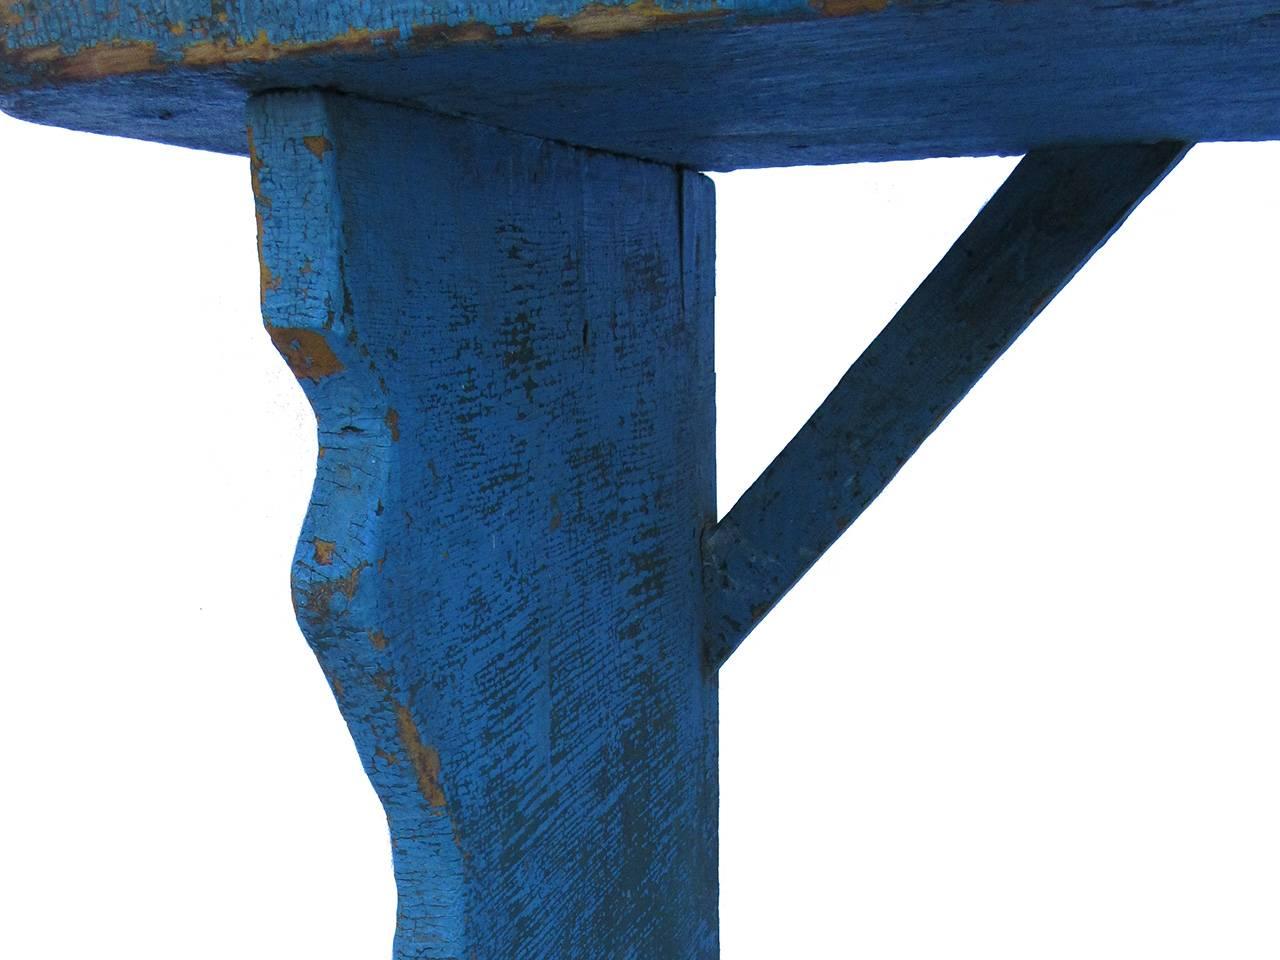 Early 1900 diminutive size bench with cut out side supports in the best blue over mustard surface, excellent condition